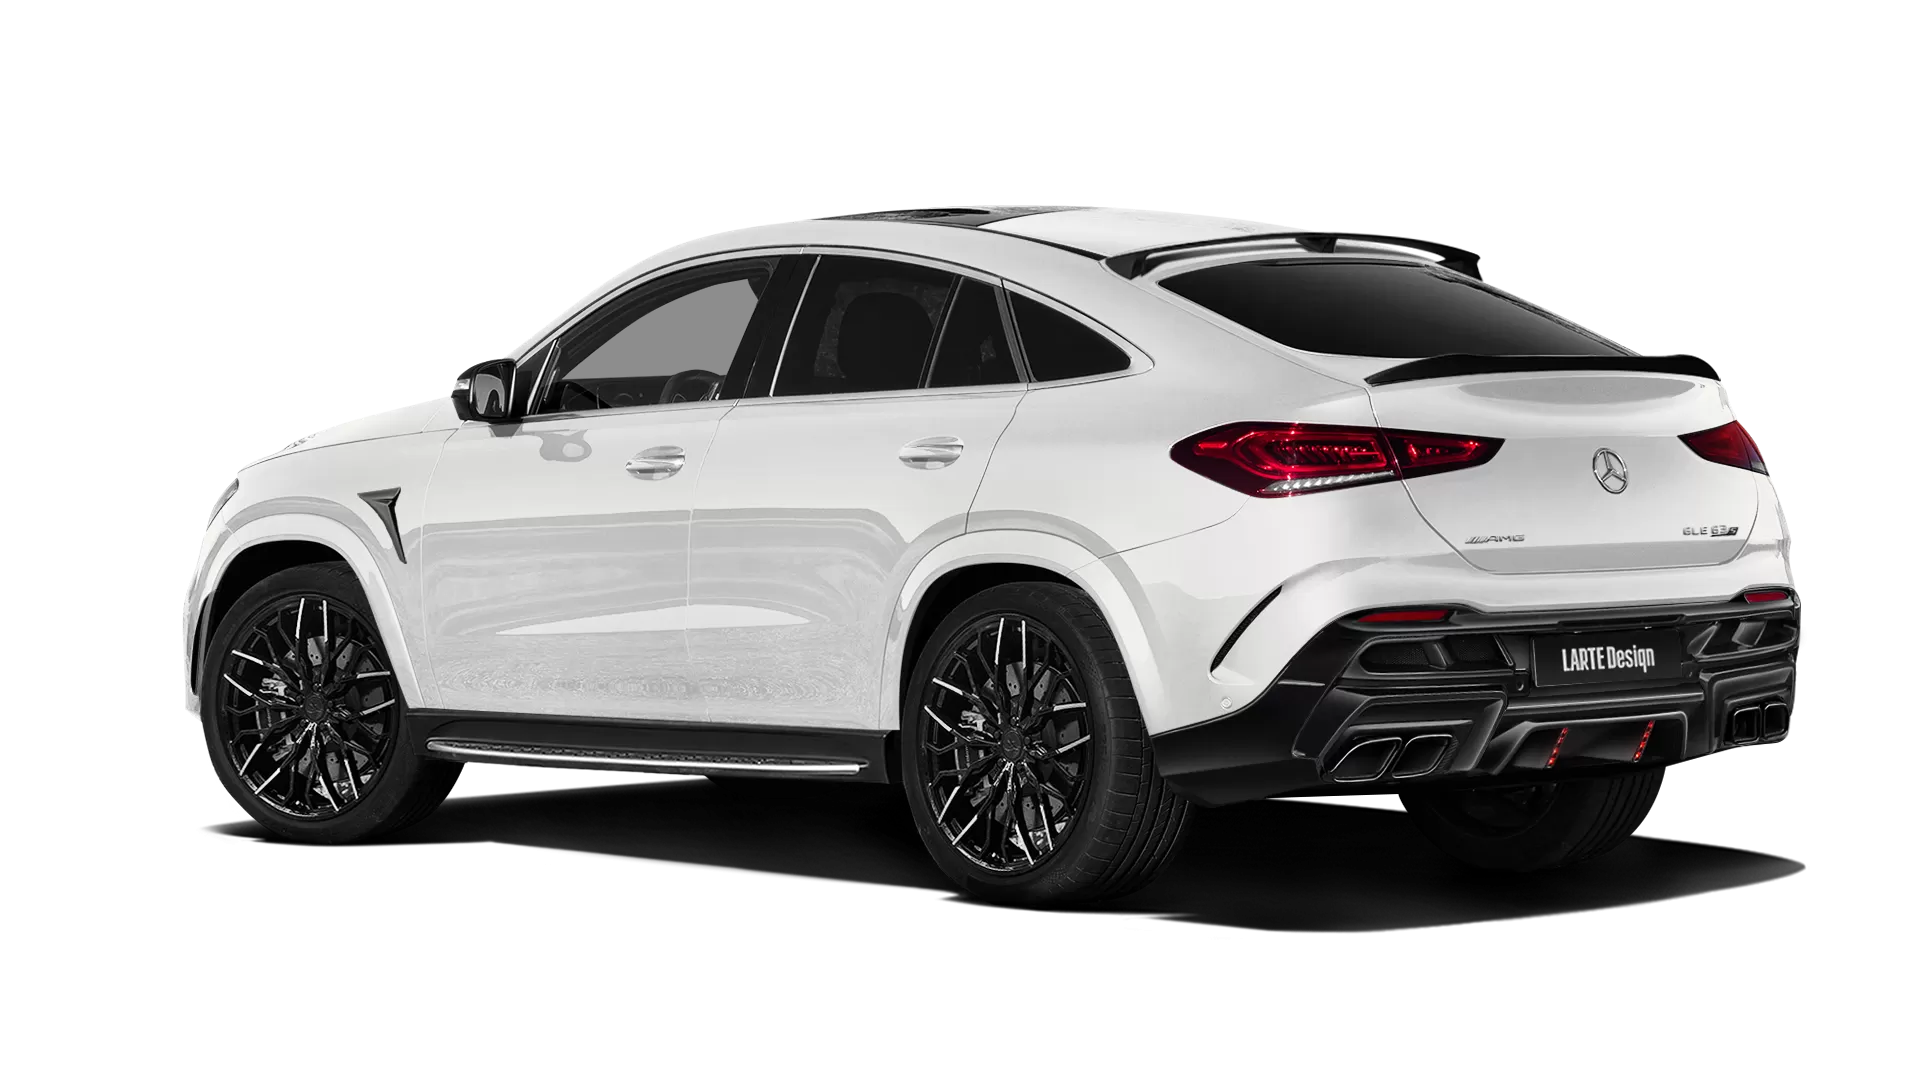 Mercedes GLE Coupe AMG 63 C167 with painted body kit: rear view shown in Diamond White